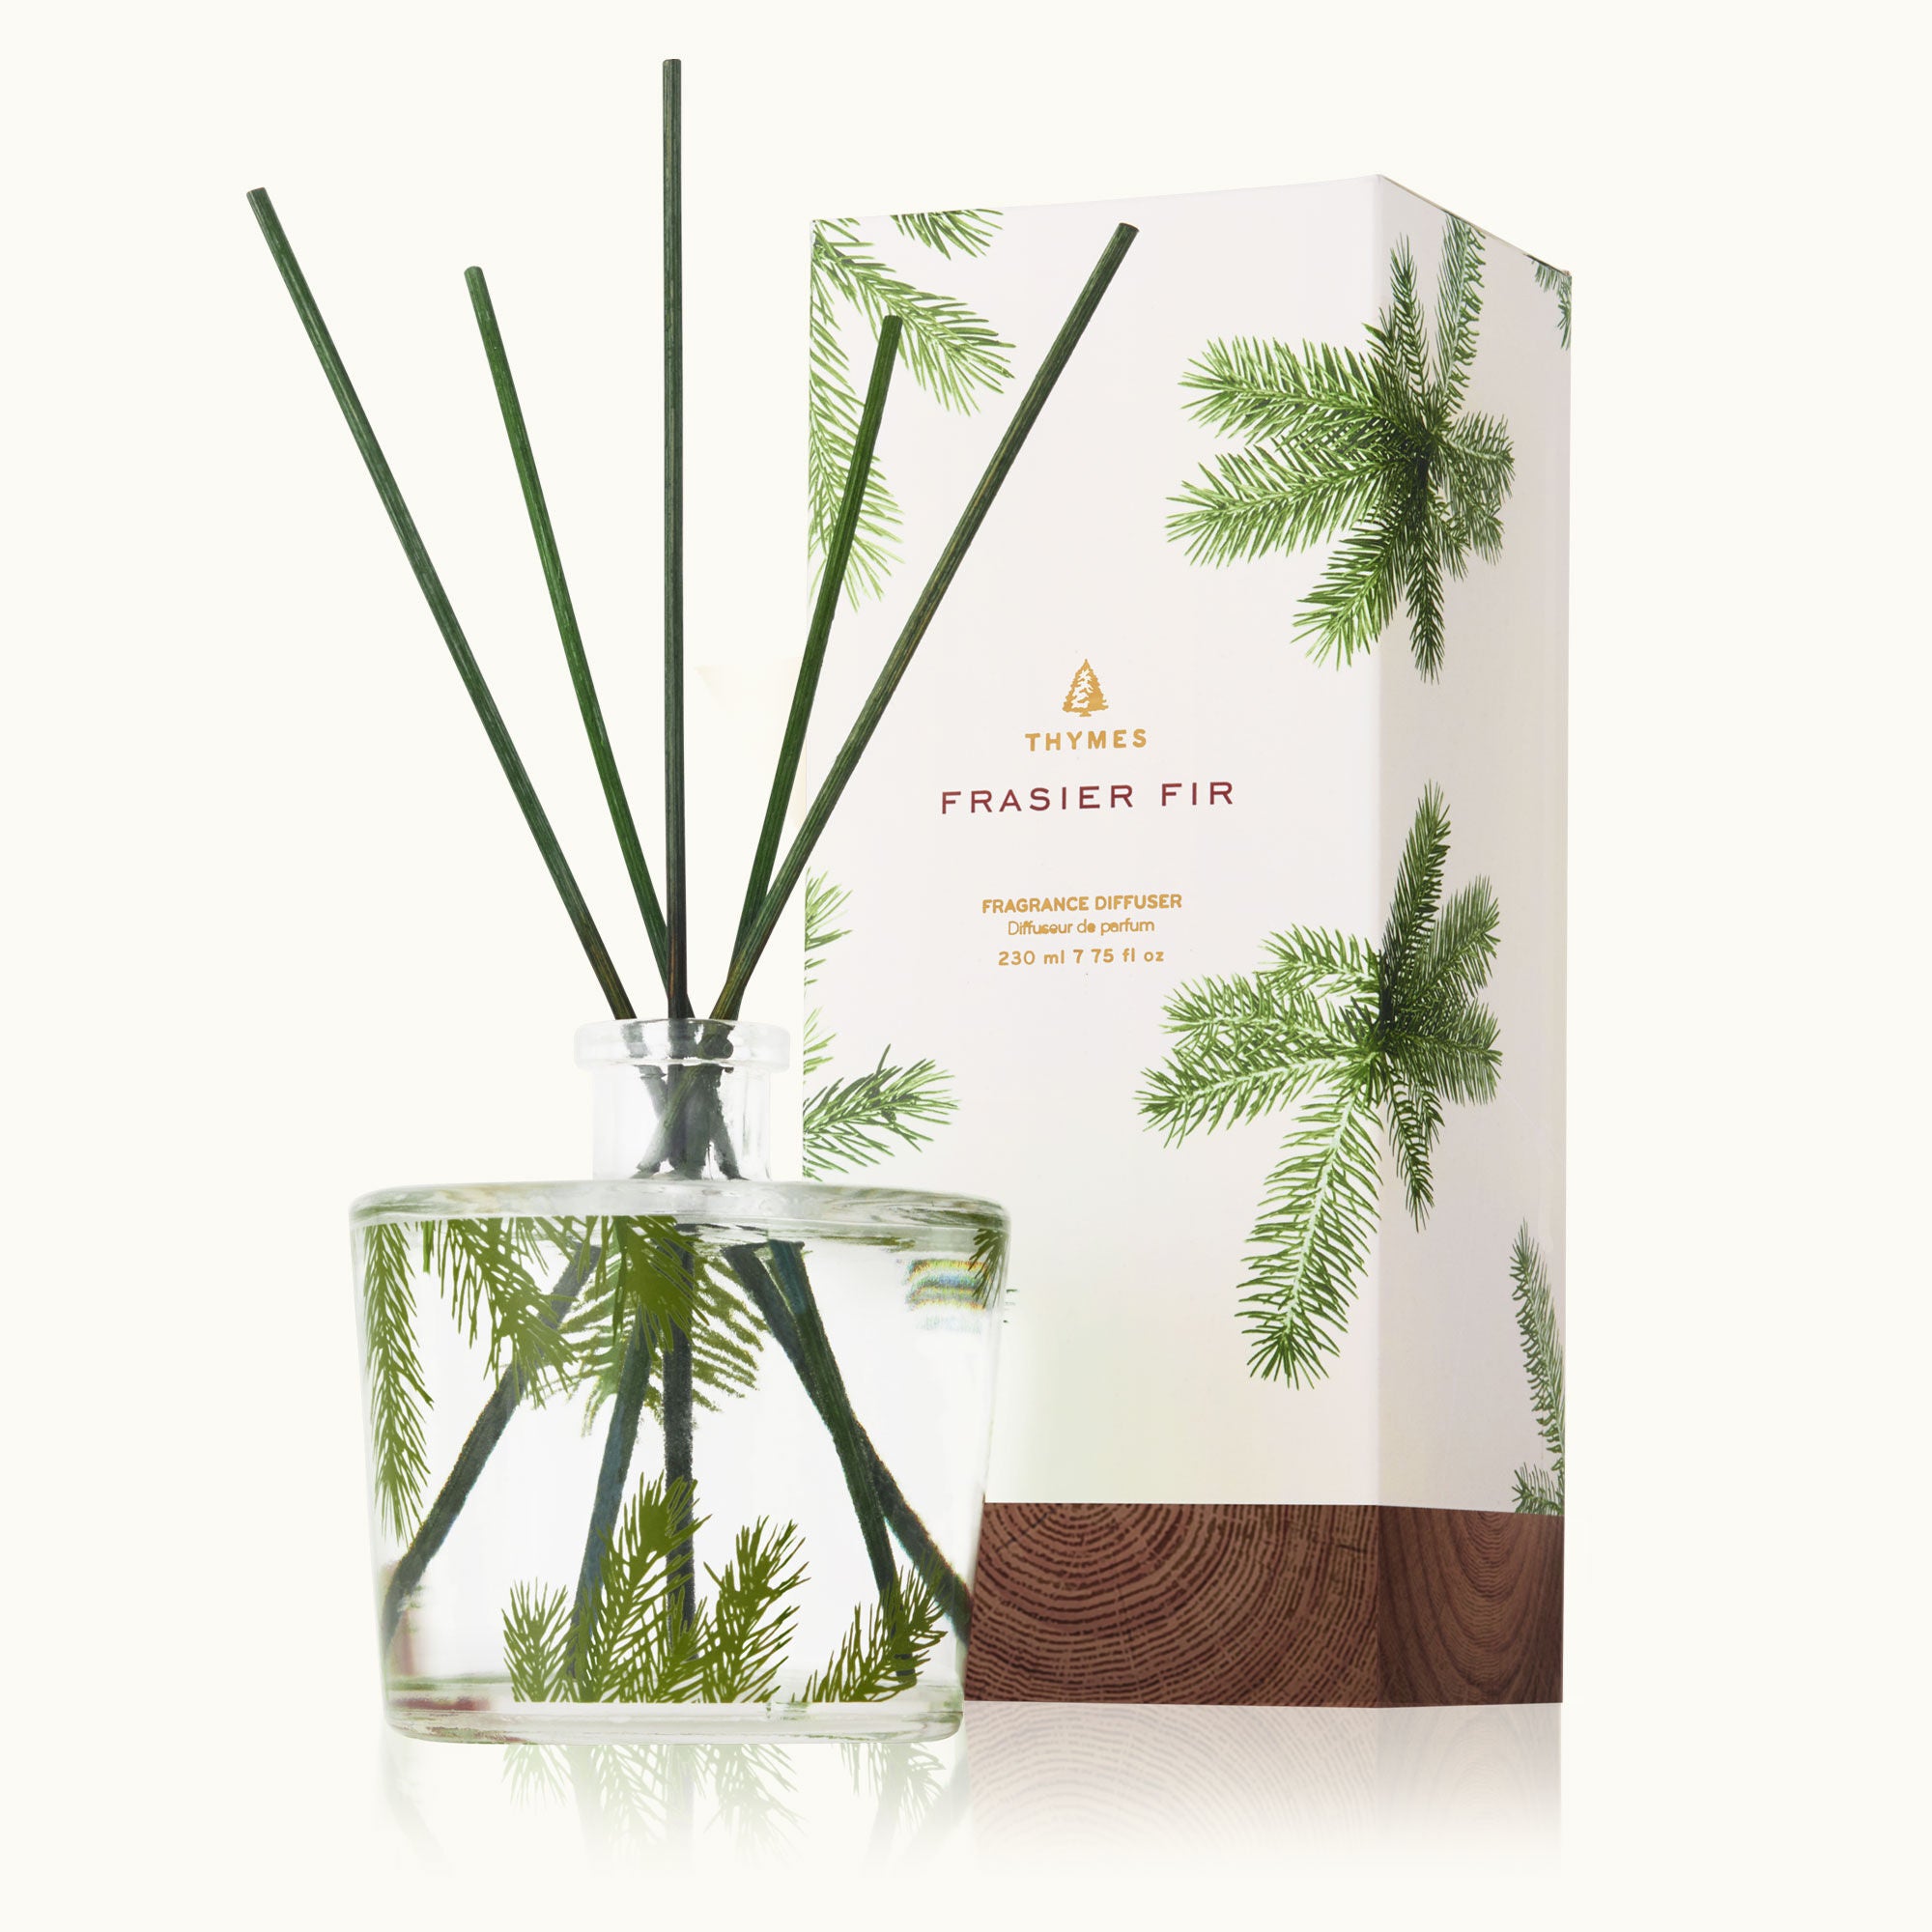 Thymes Frasier Fir Reed Diffuser - Pine Needle